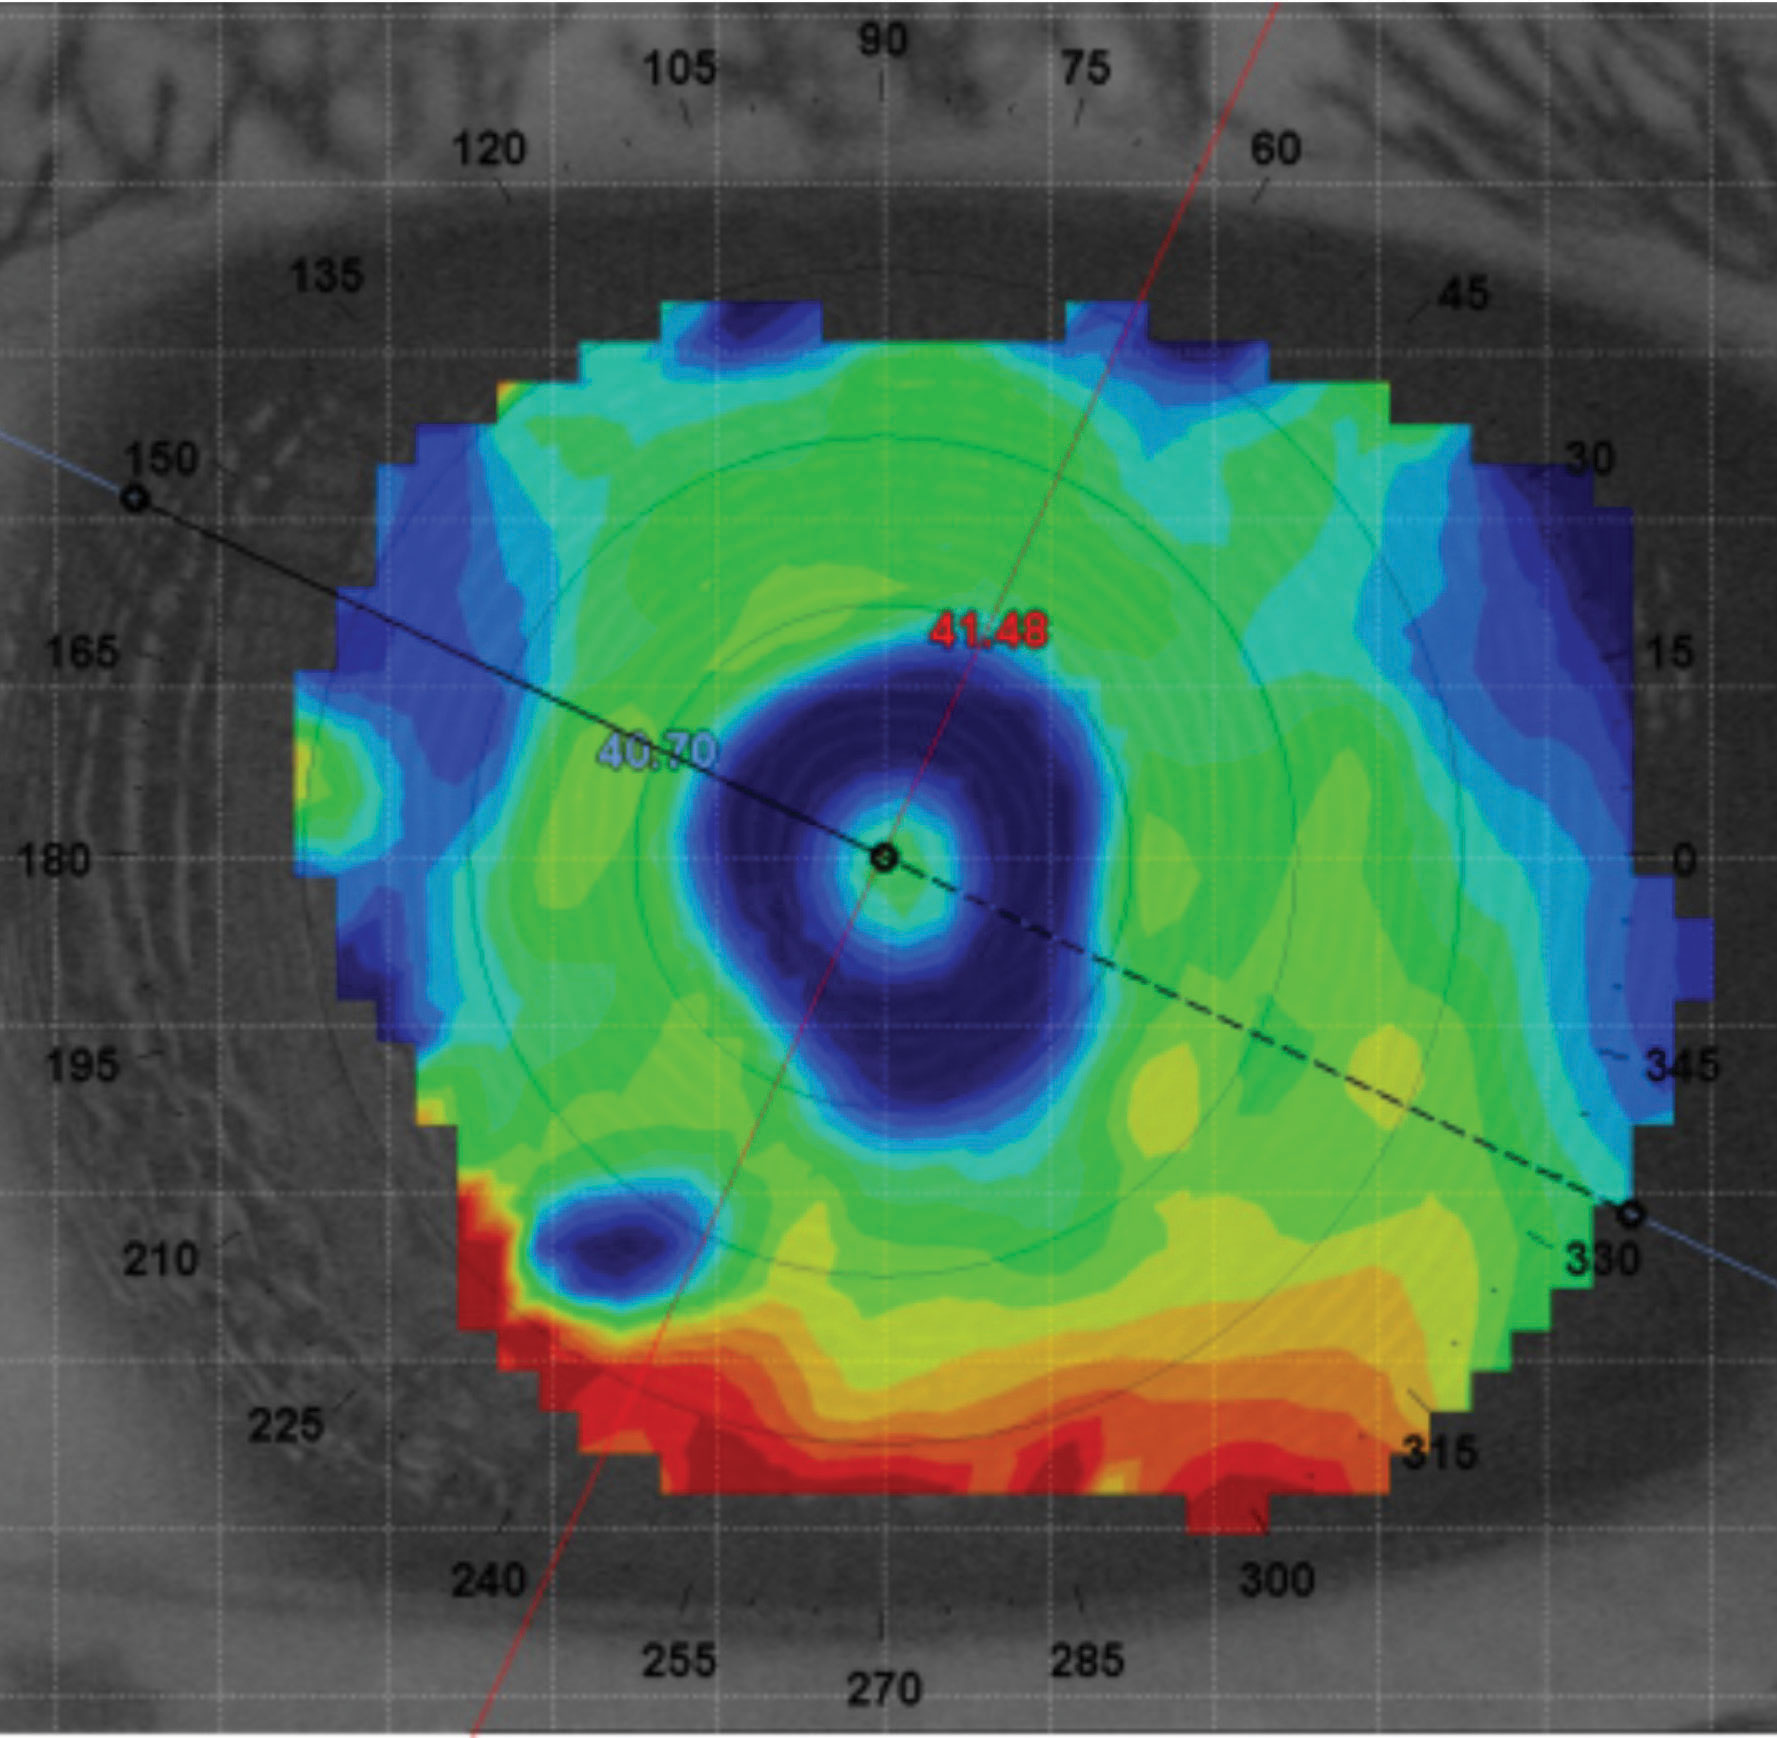 Over-lens topography of the left eye showing appropriate alignment with multifocal optics with the line of sight. Tangential map scaled to accentuate the multifocal.